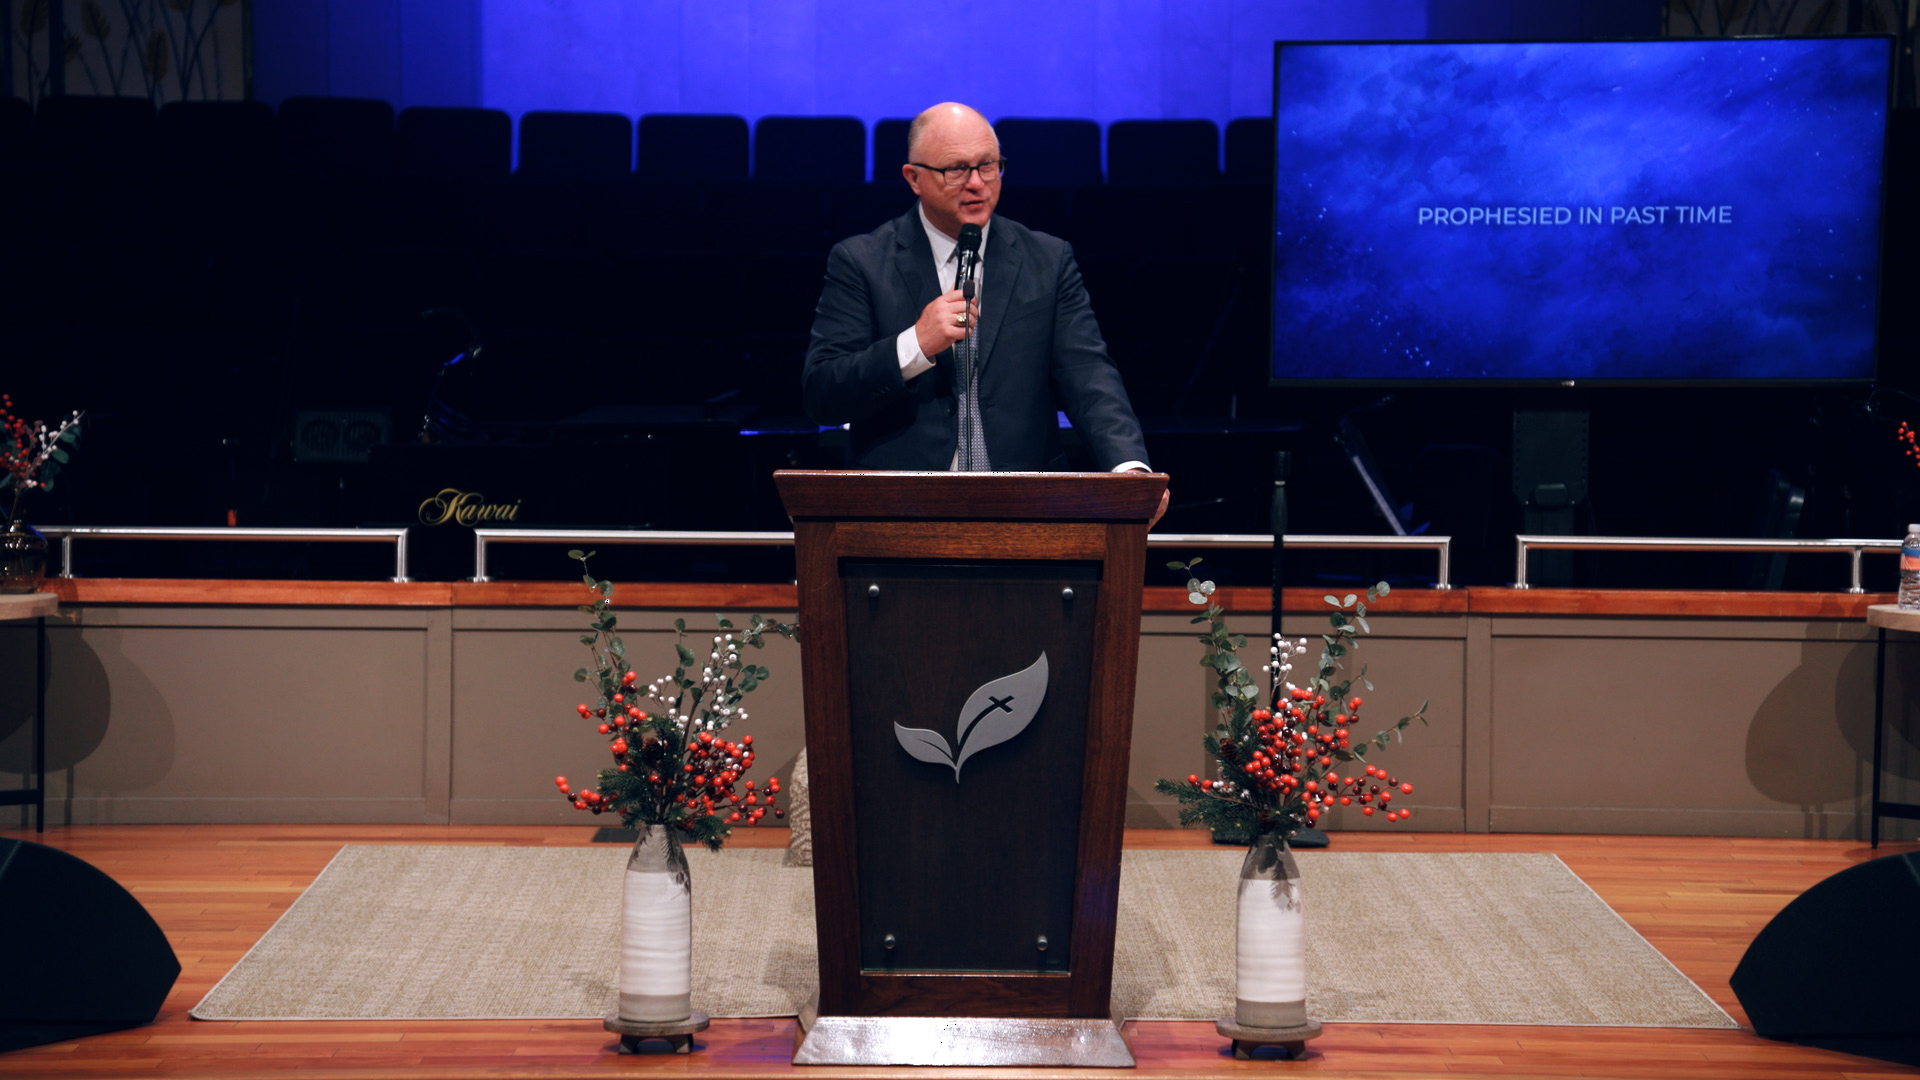 Pastor Paul Chappell: A Divine Delivery